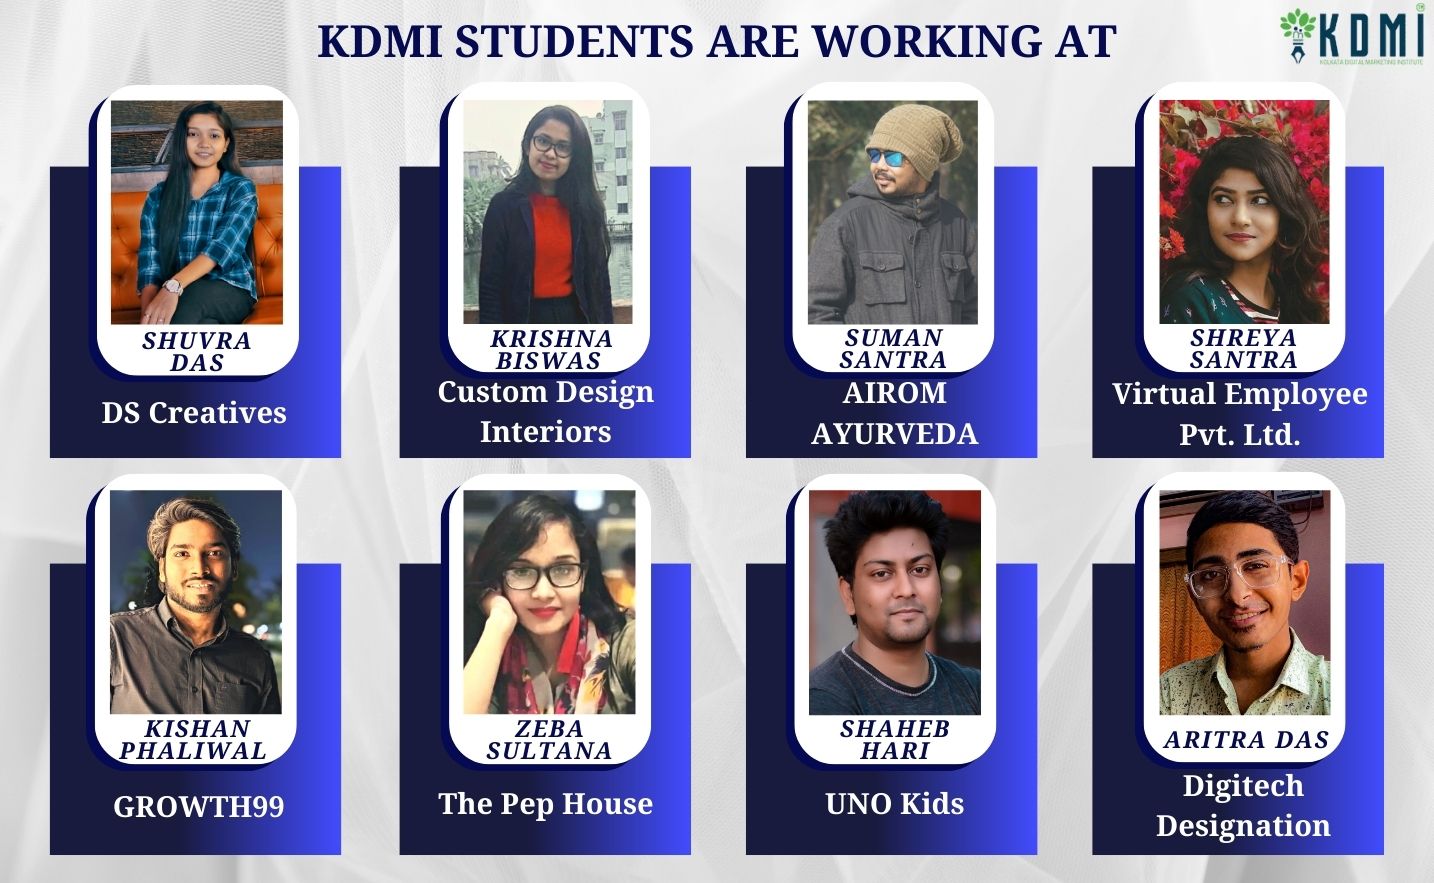 Kdmi's students placement